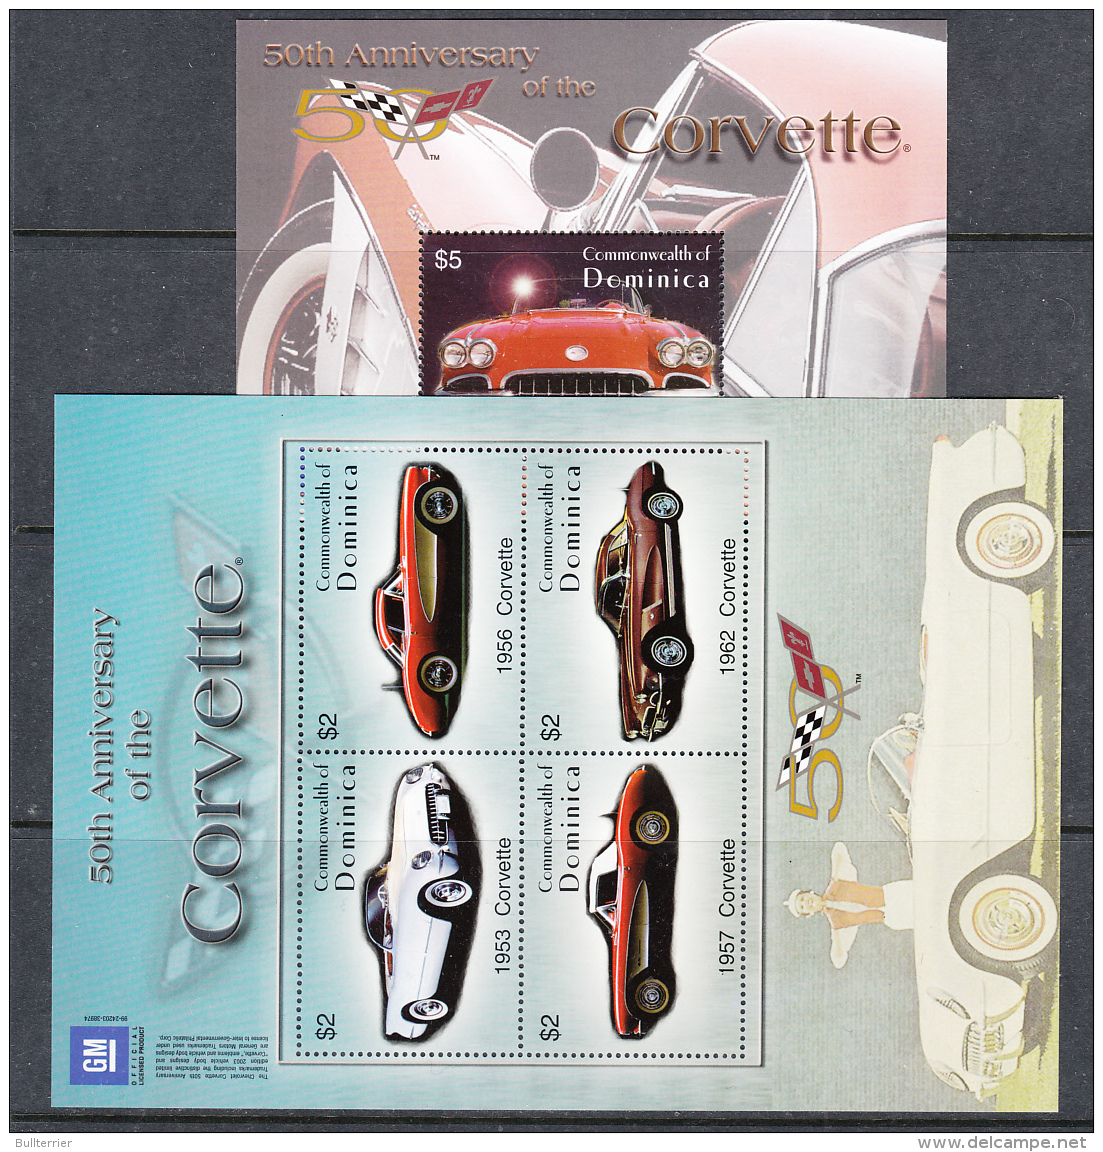 CARS - DOMINICA - 2003 - CORVETTE  50TH ANNIVERSRAY  SHEETLET OF 4 + S/SHEET MINT NEVER HINGED - Cars